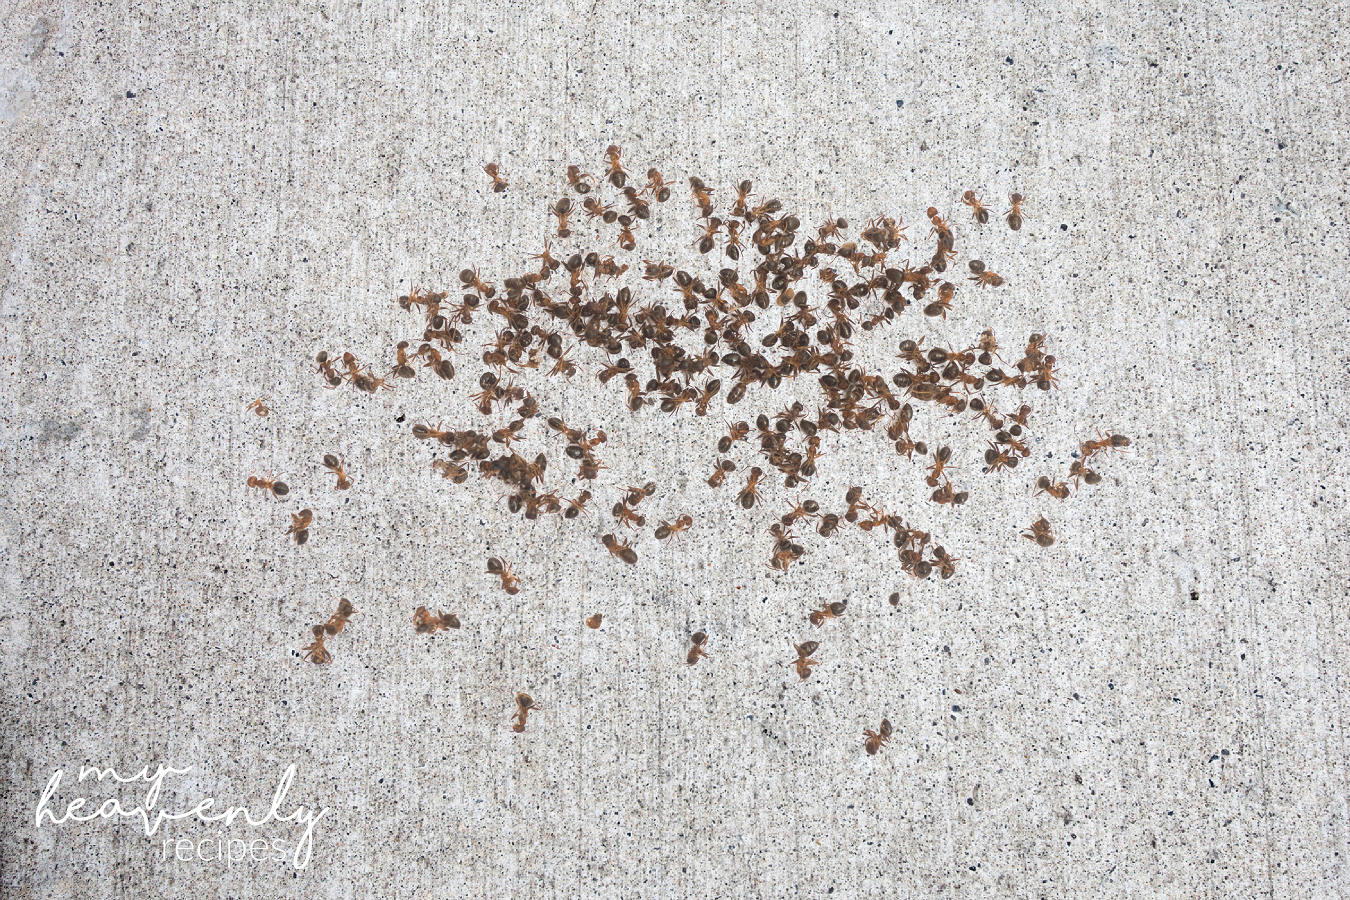 How to Kill Fire Ants (Homemade Solution)